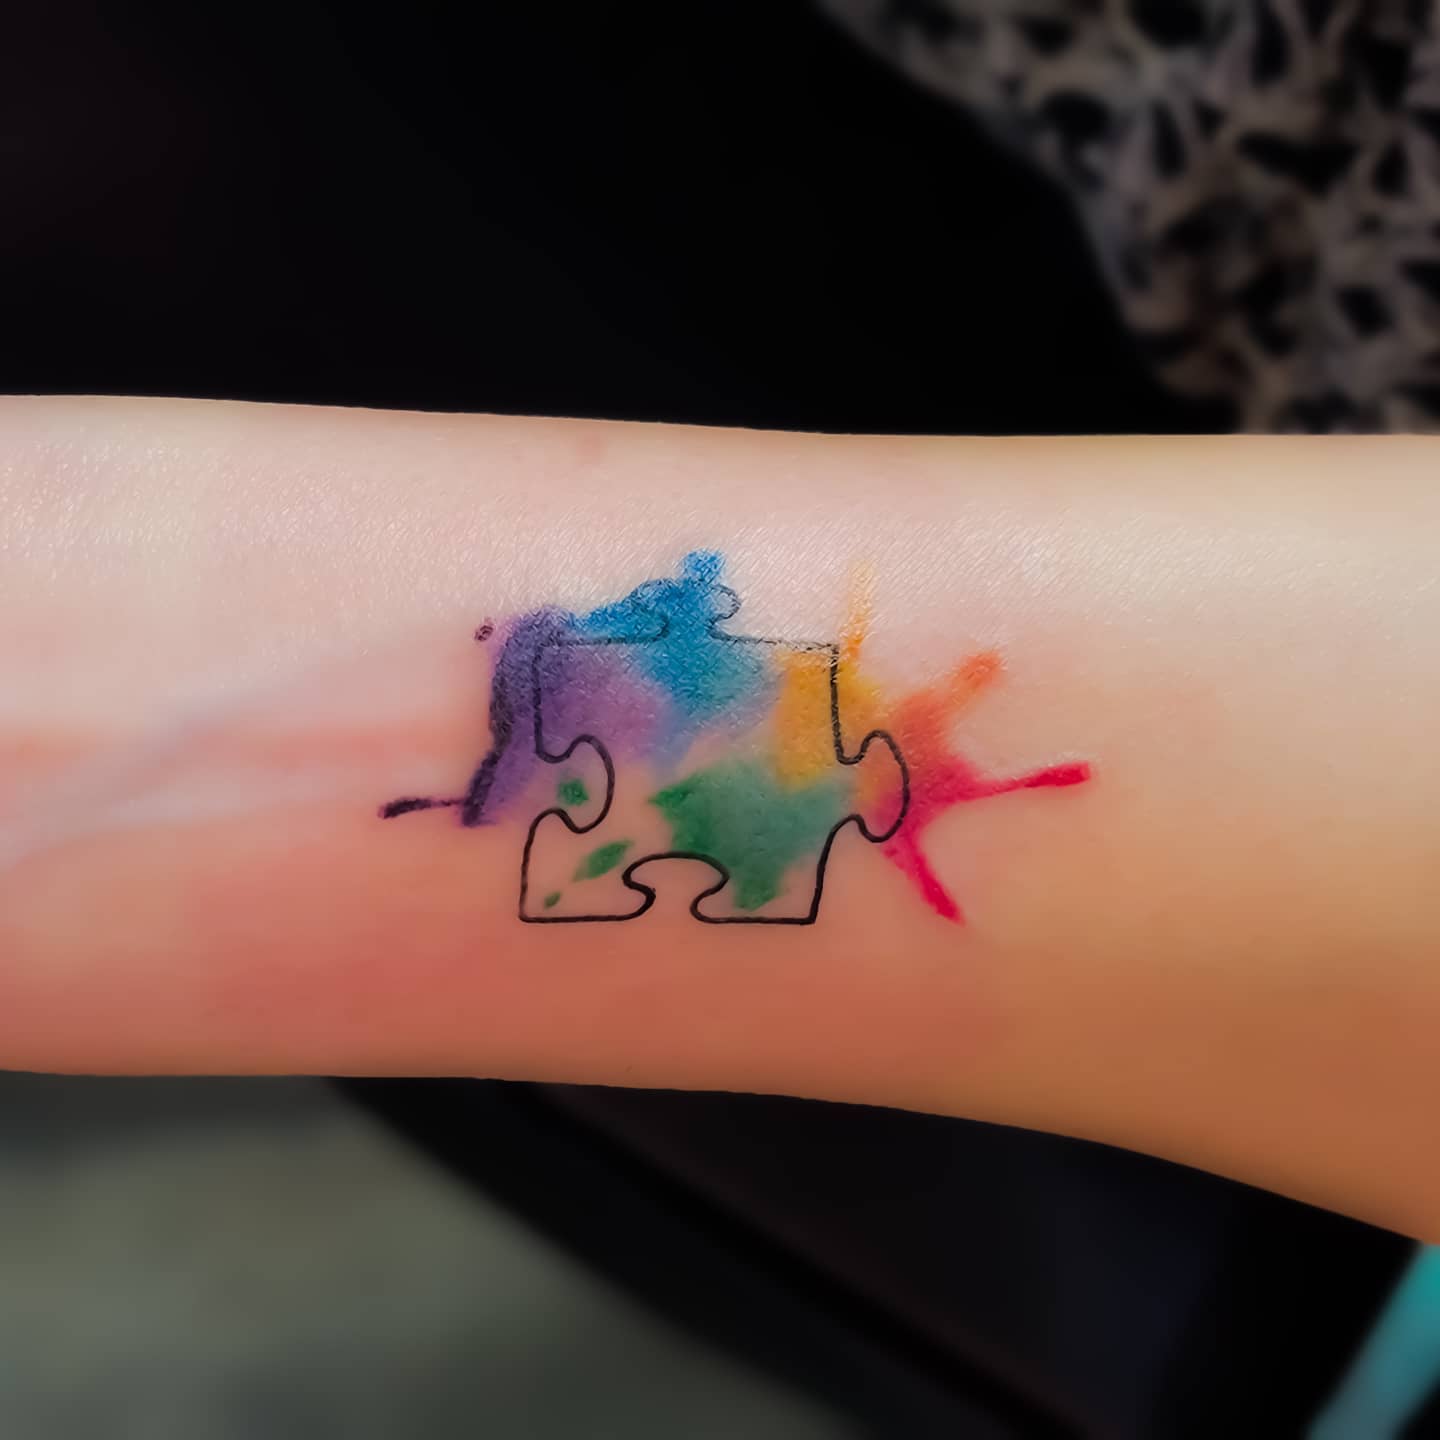 Small and colorful, this tattoo will take you less than one hour to get.